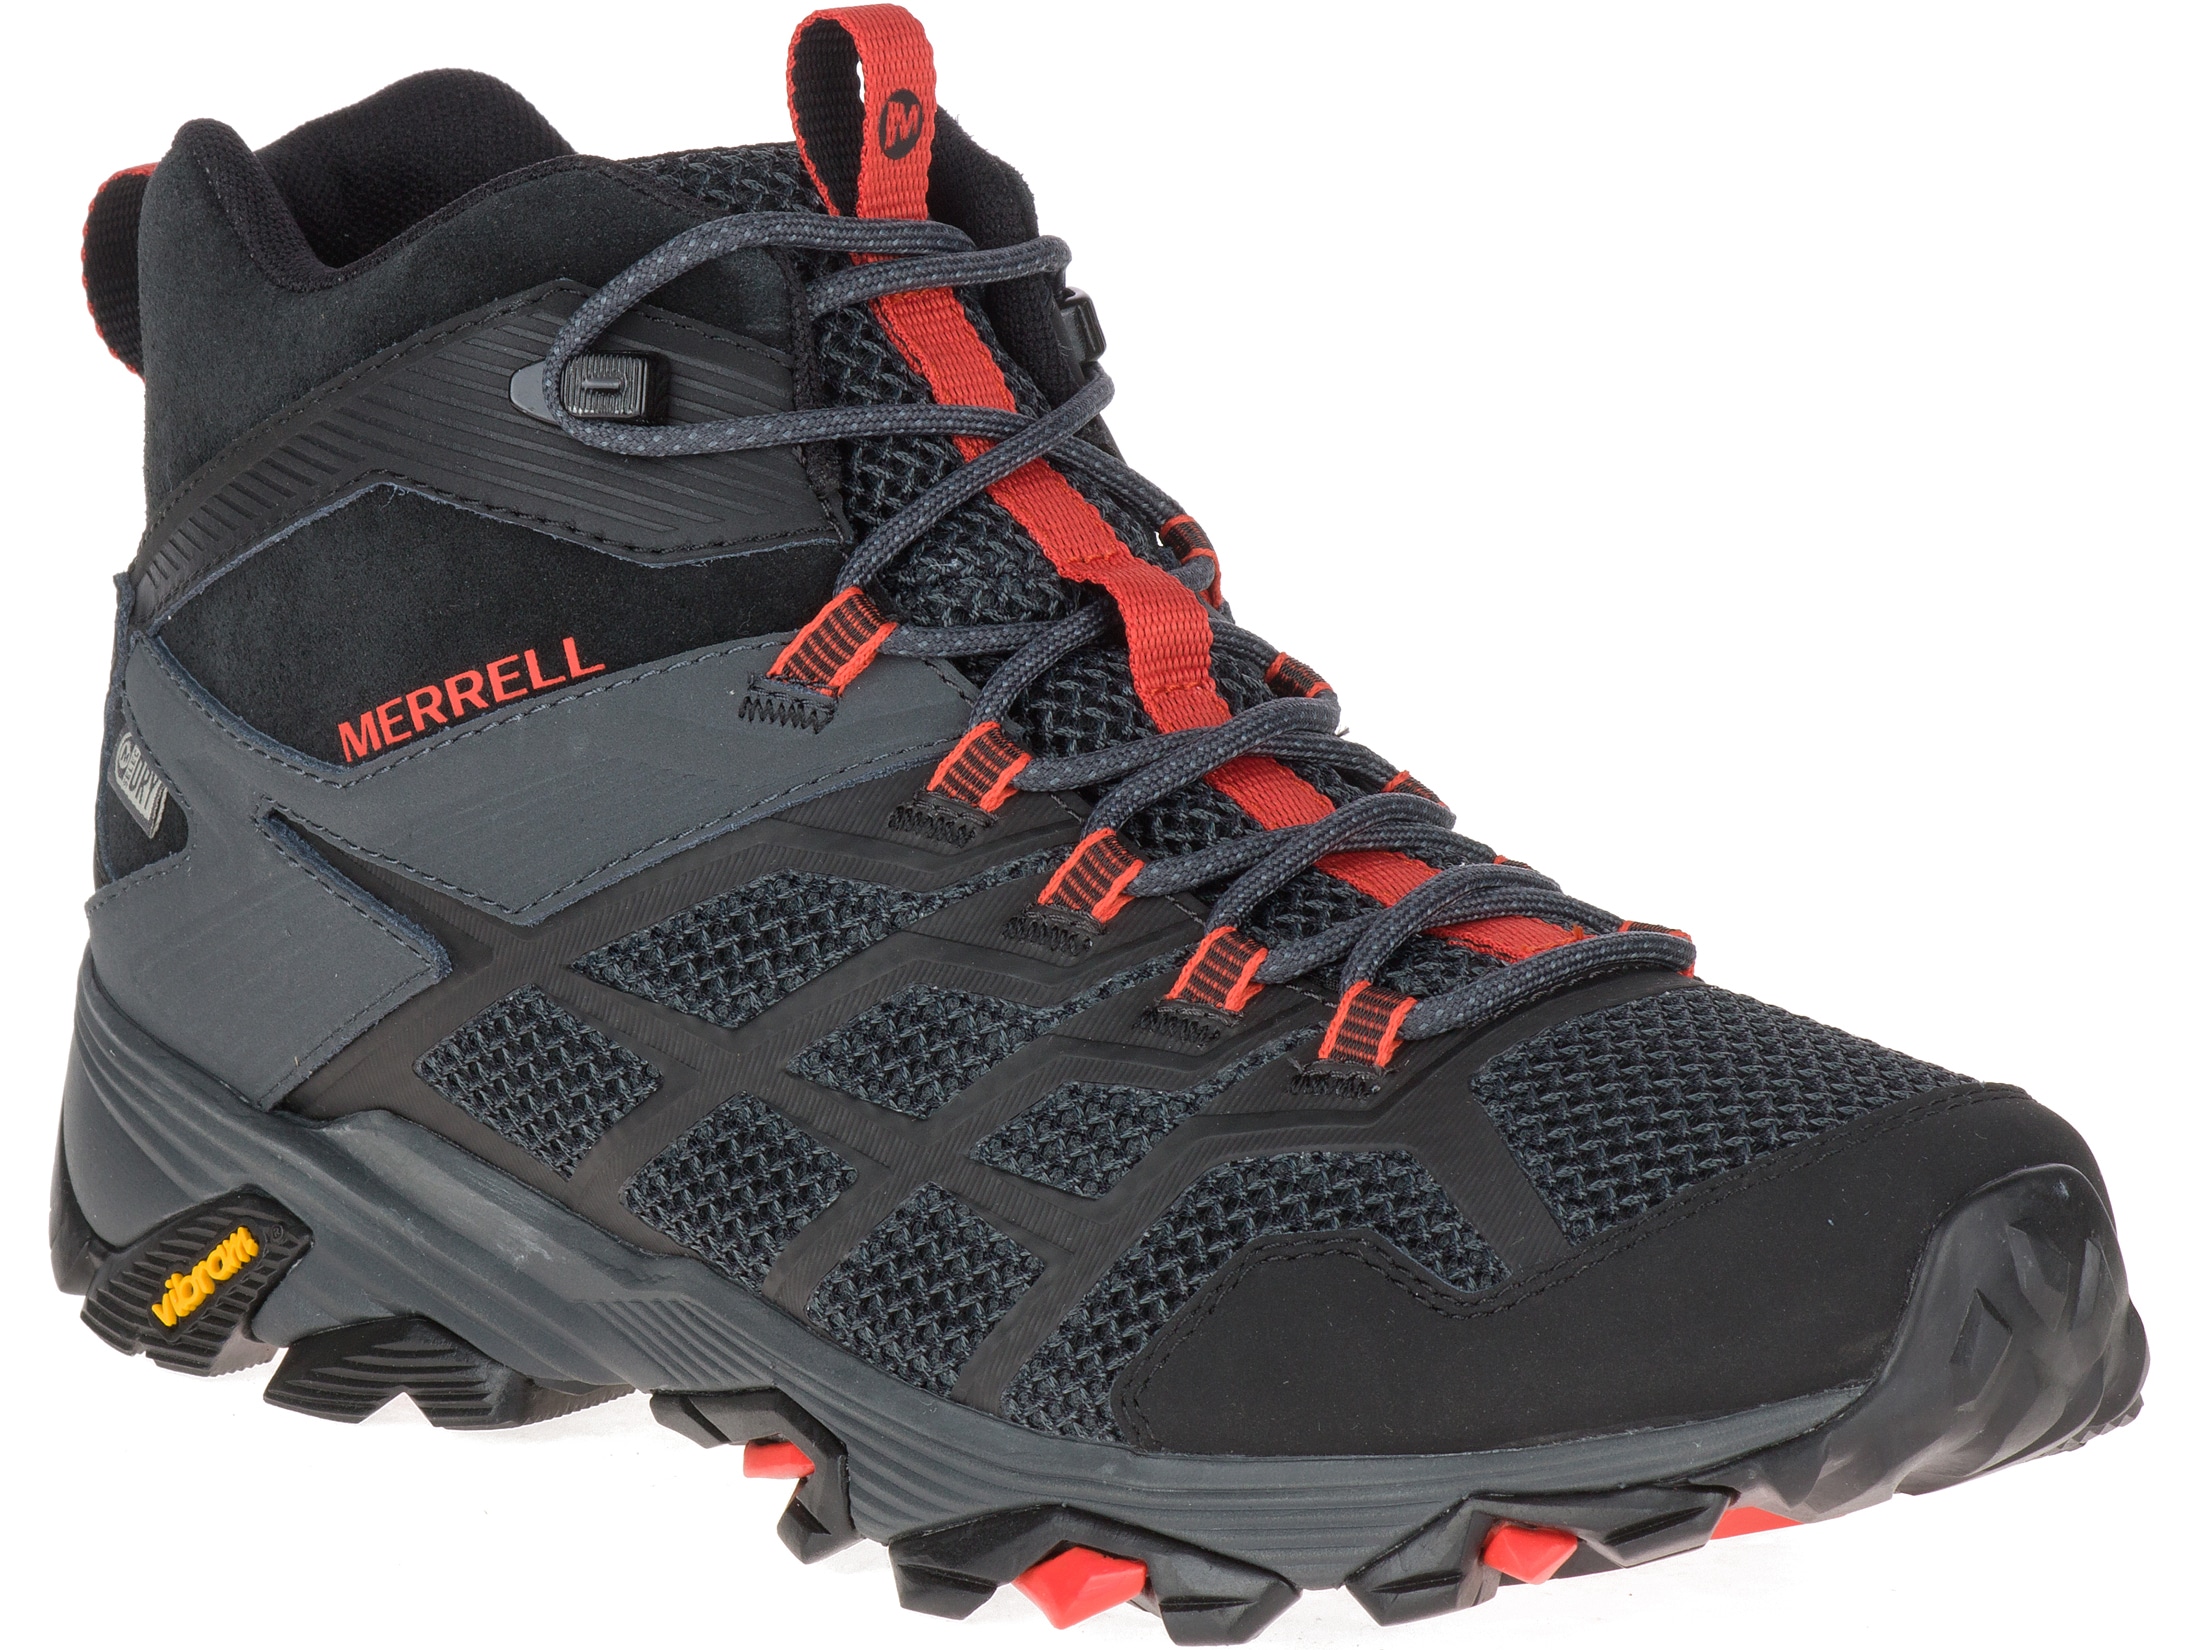 Merrell Moab FST 2 Mid 5 Hiking Boots Leather/Synthetic Black/Granite